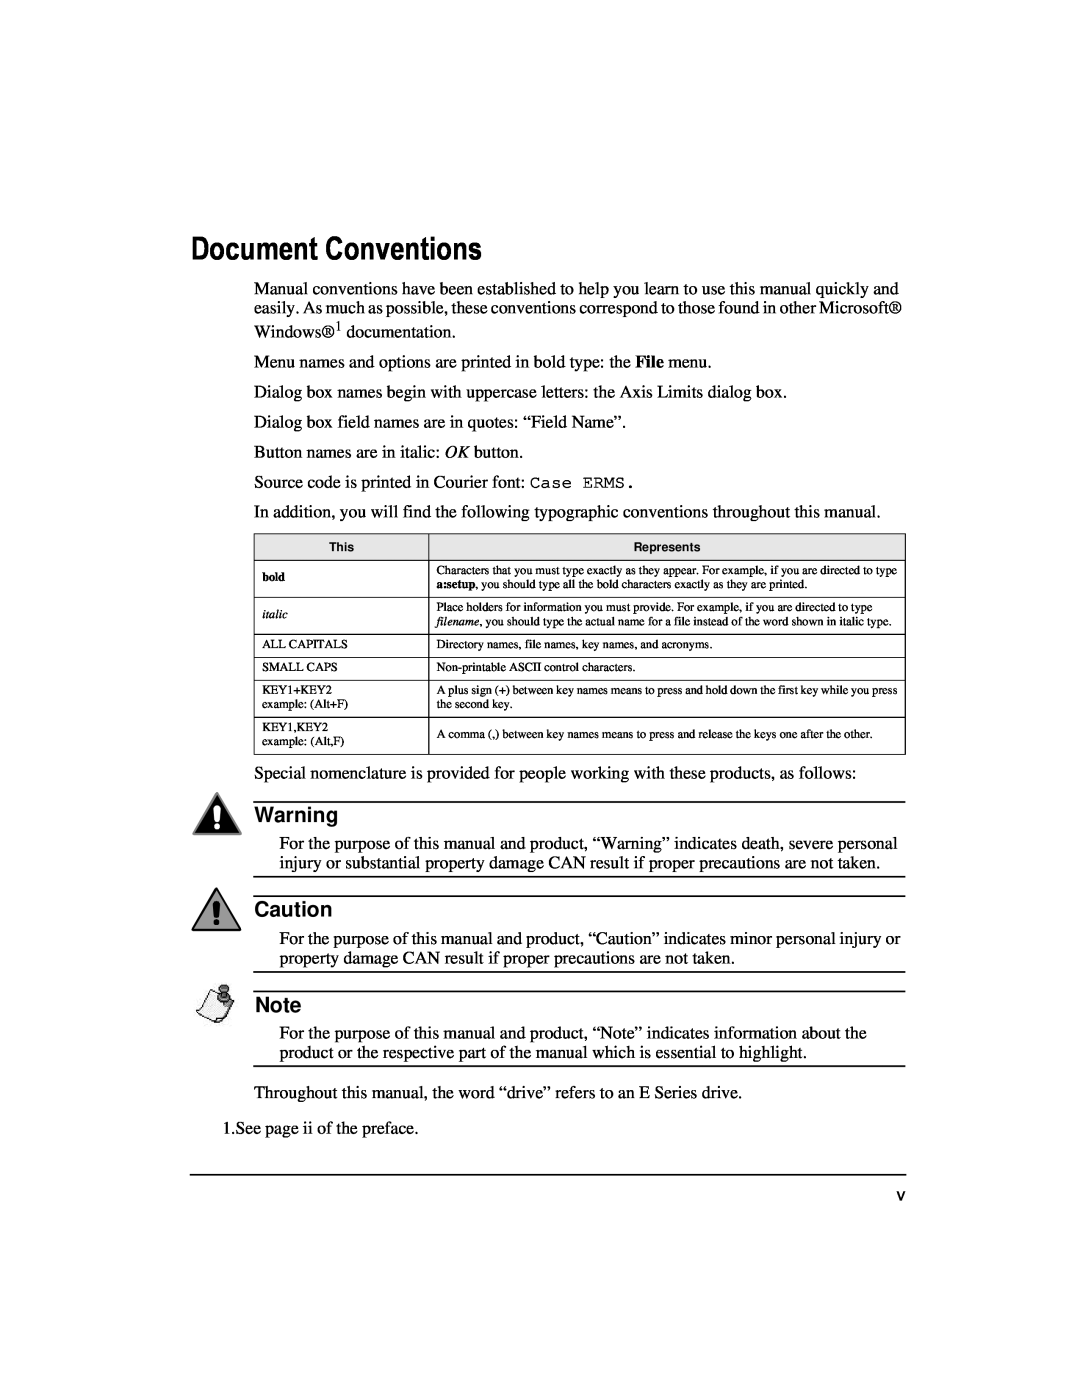 Emerson 400508-02 installation manual Document Conventions 